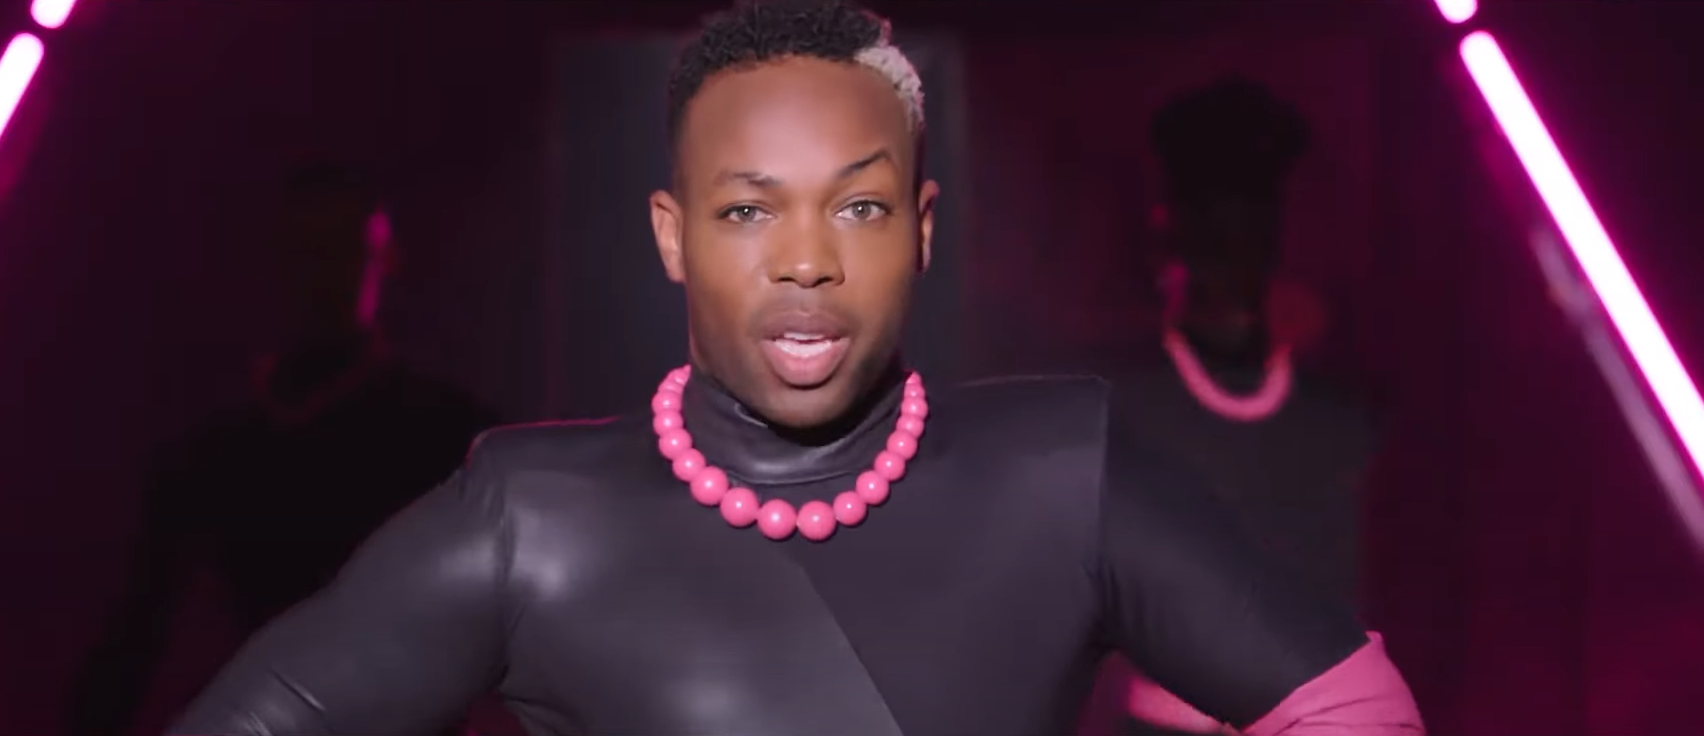 Just Dance 2022 releases this year, featuring Todrick Hall - Checkpoint